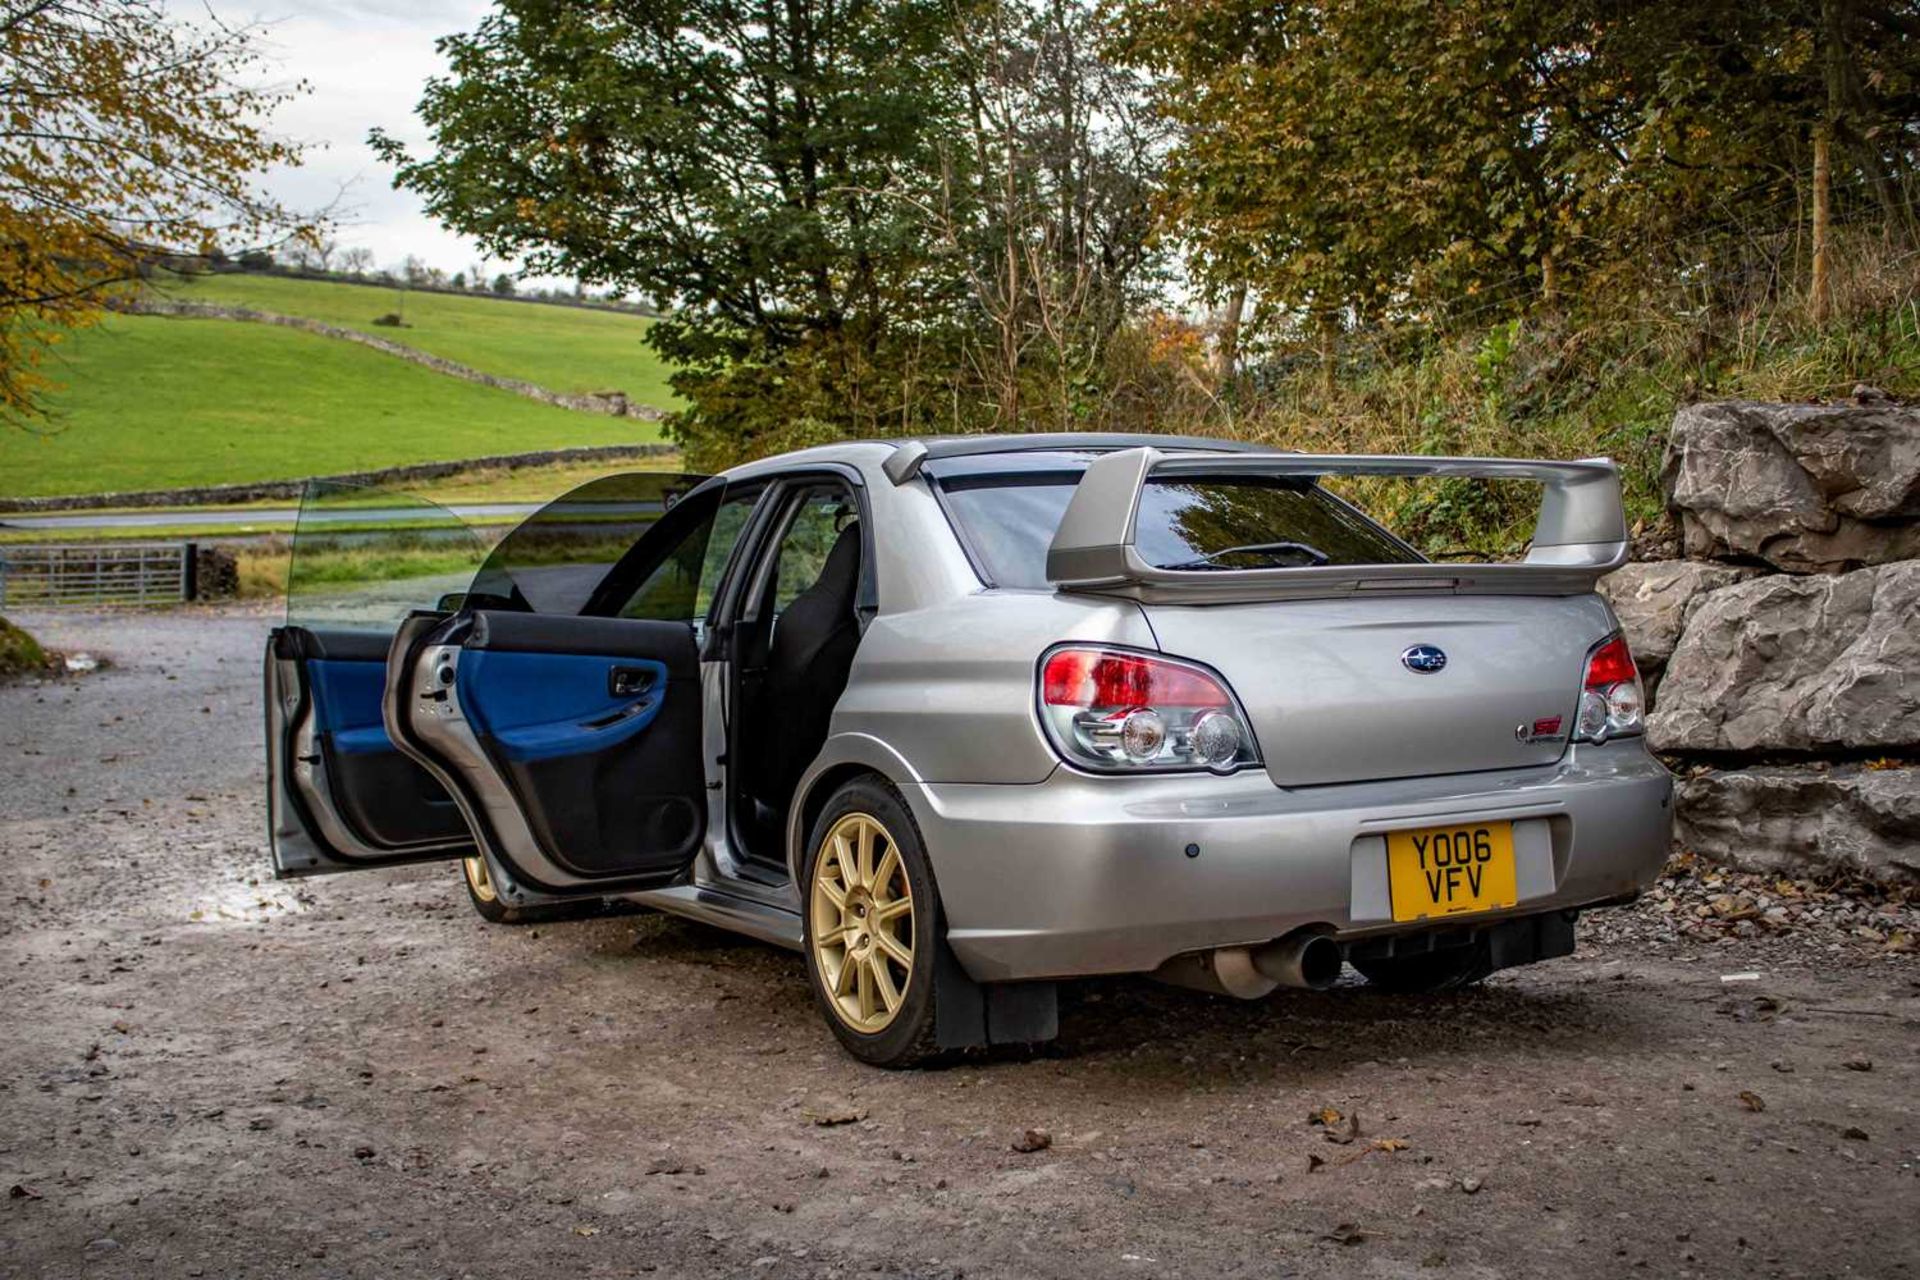 2006 Subaru Impreza WRX STi Featuring a plethora of desirable upgrades, supported by a dyno printout - Image 14 of 103